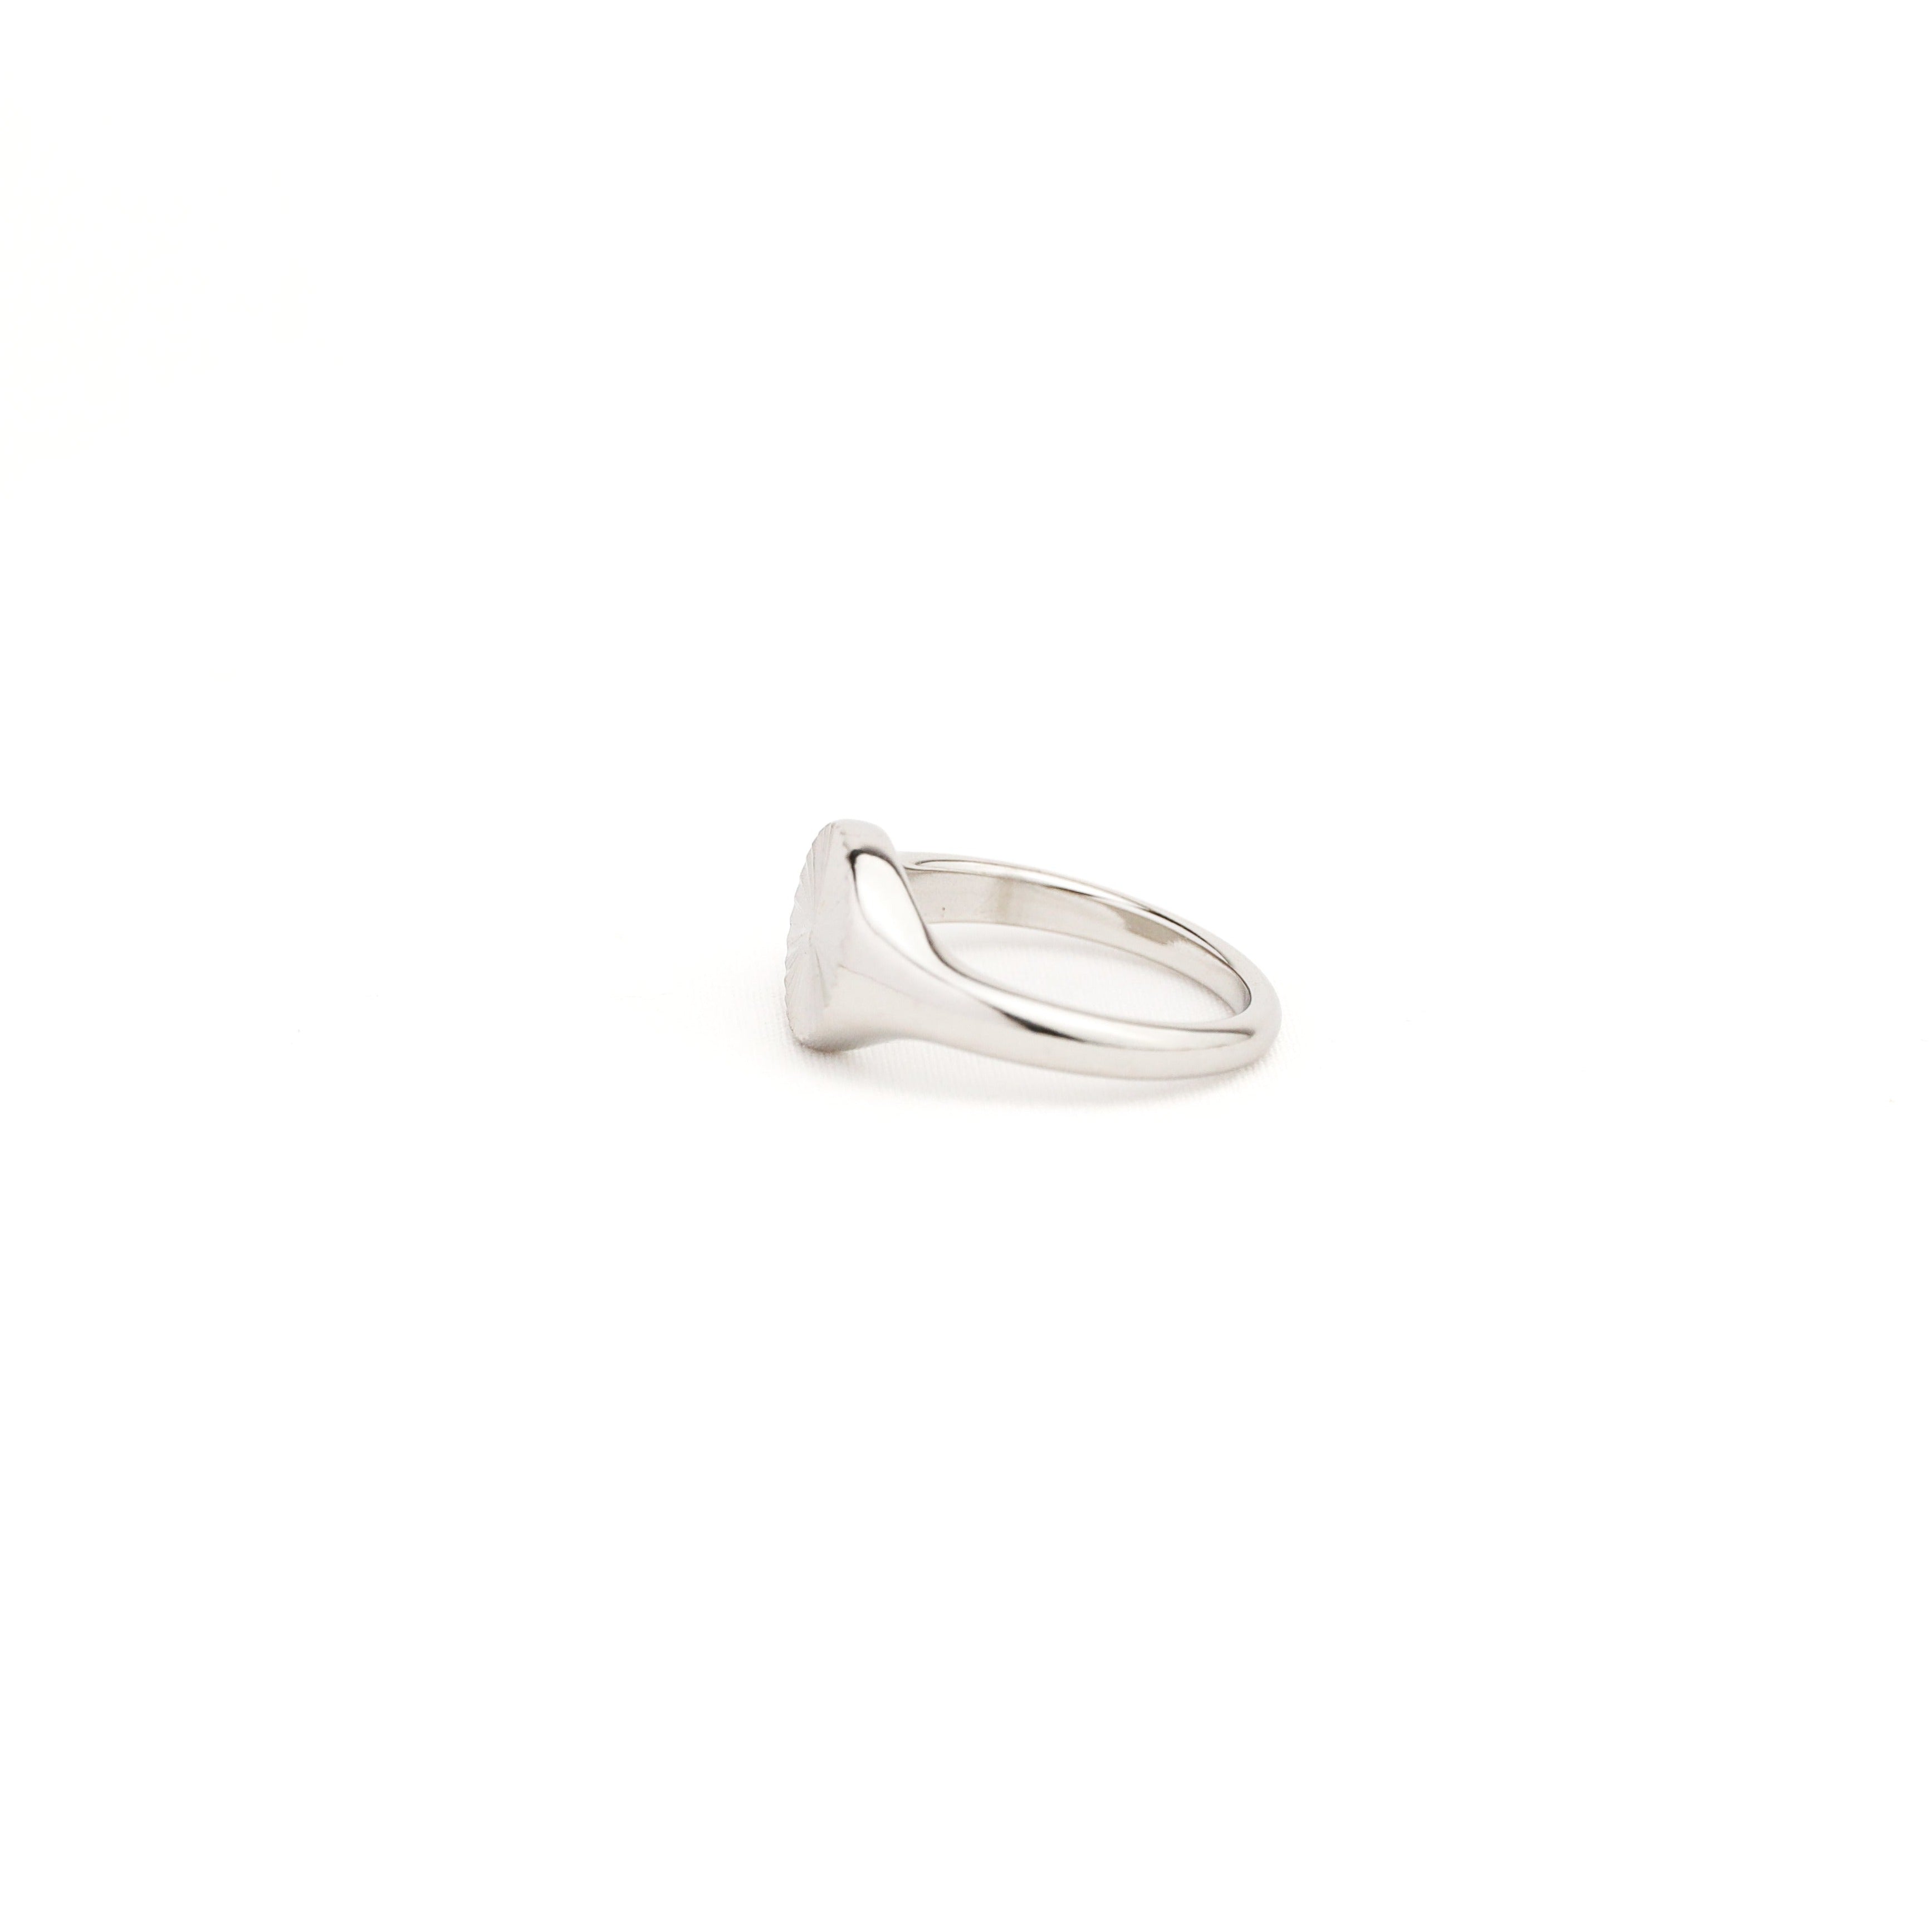 Small Face Spiral Ring